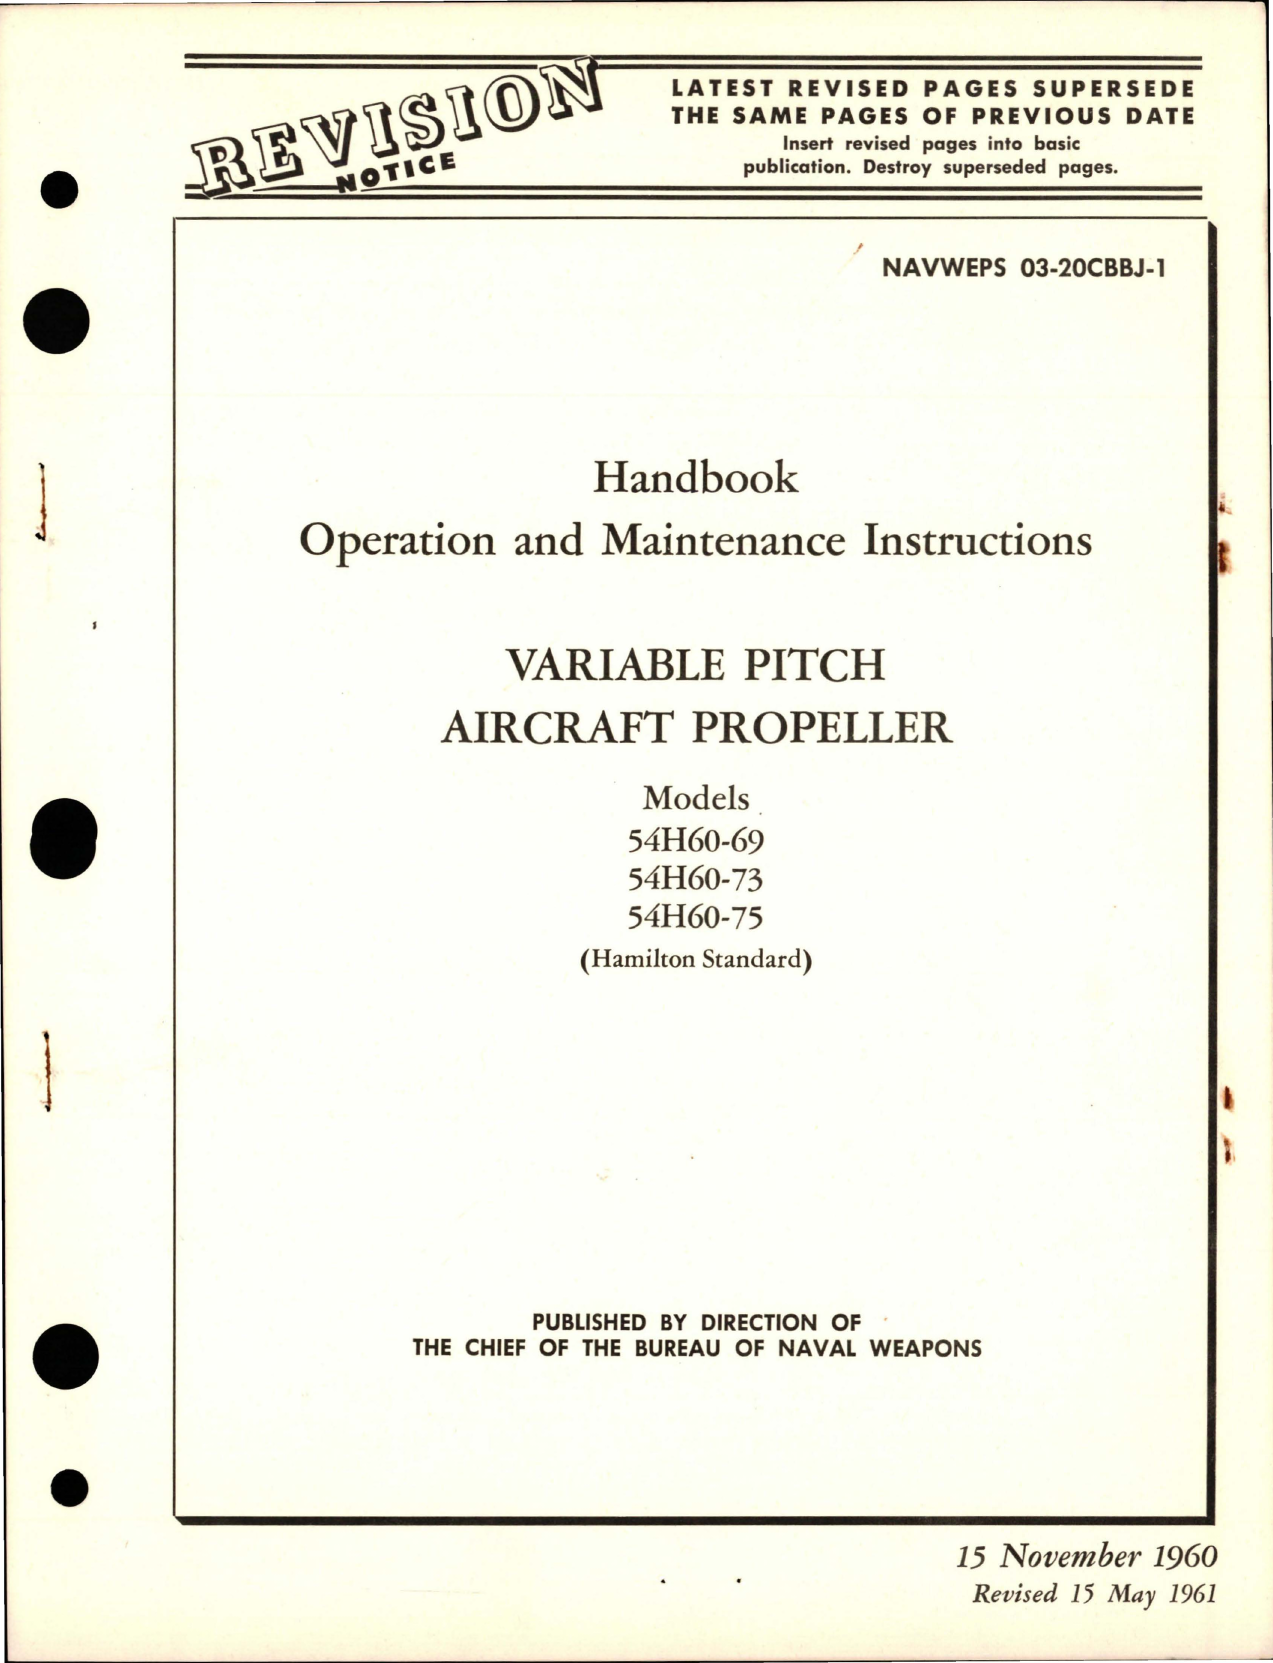 Sample page 1 from AirCorps Library document: Operation and Maintenance Instructions for Variable Pitch Propeller - Models 54H60-69, 54H60-75, and 54H60-73